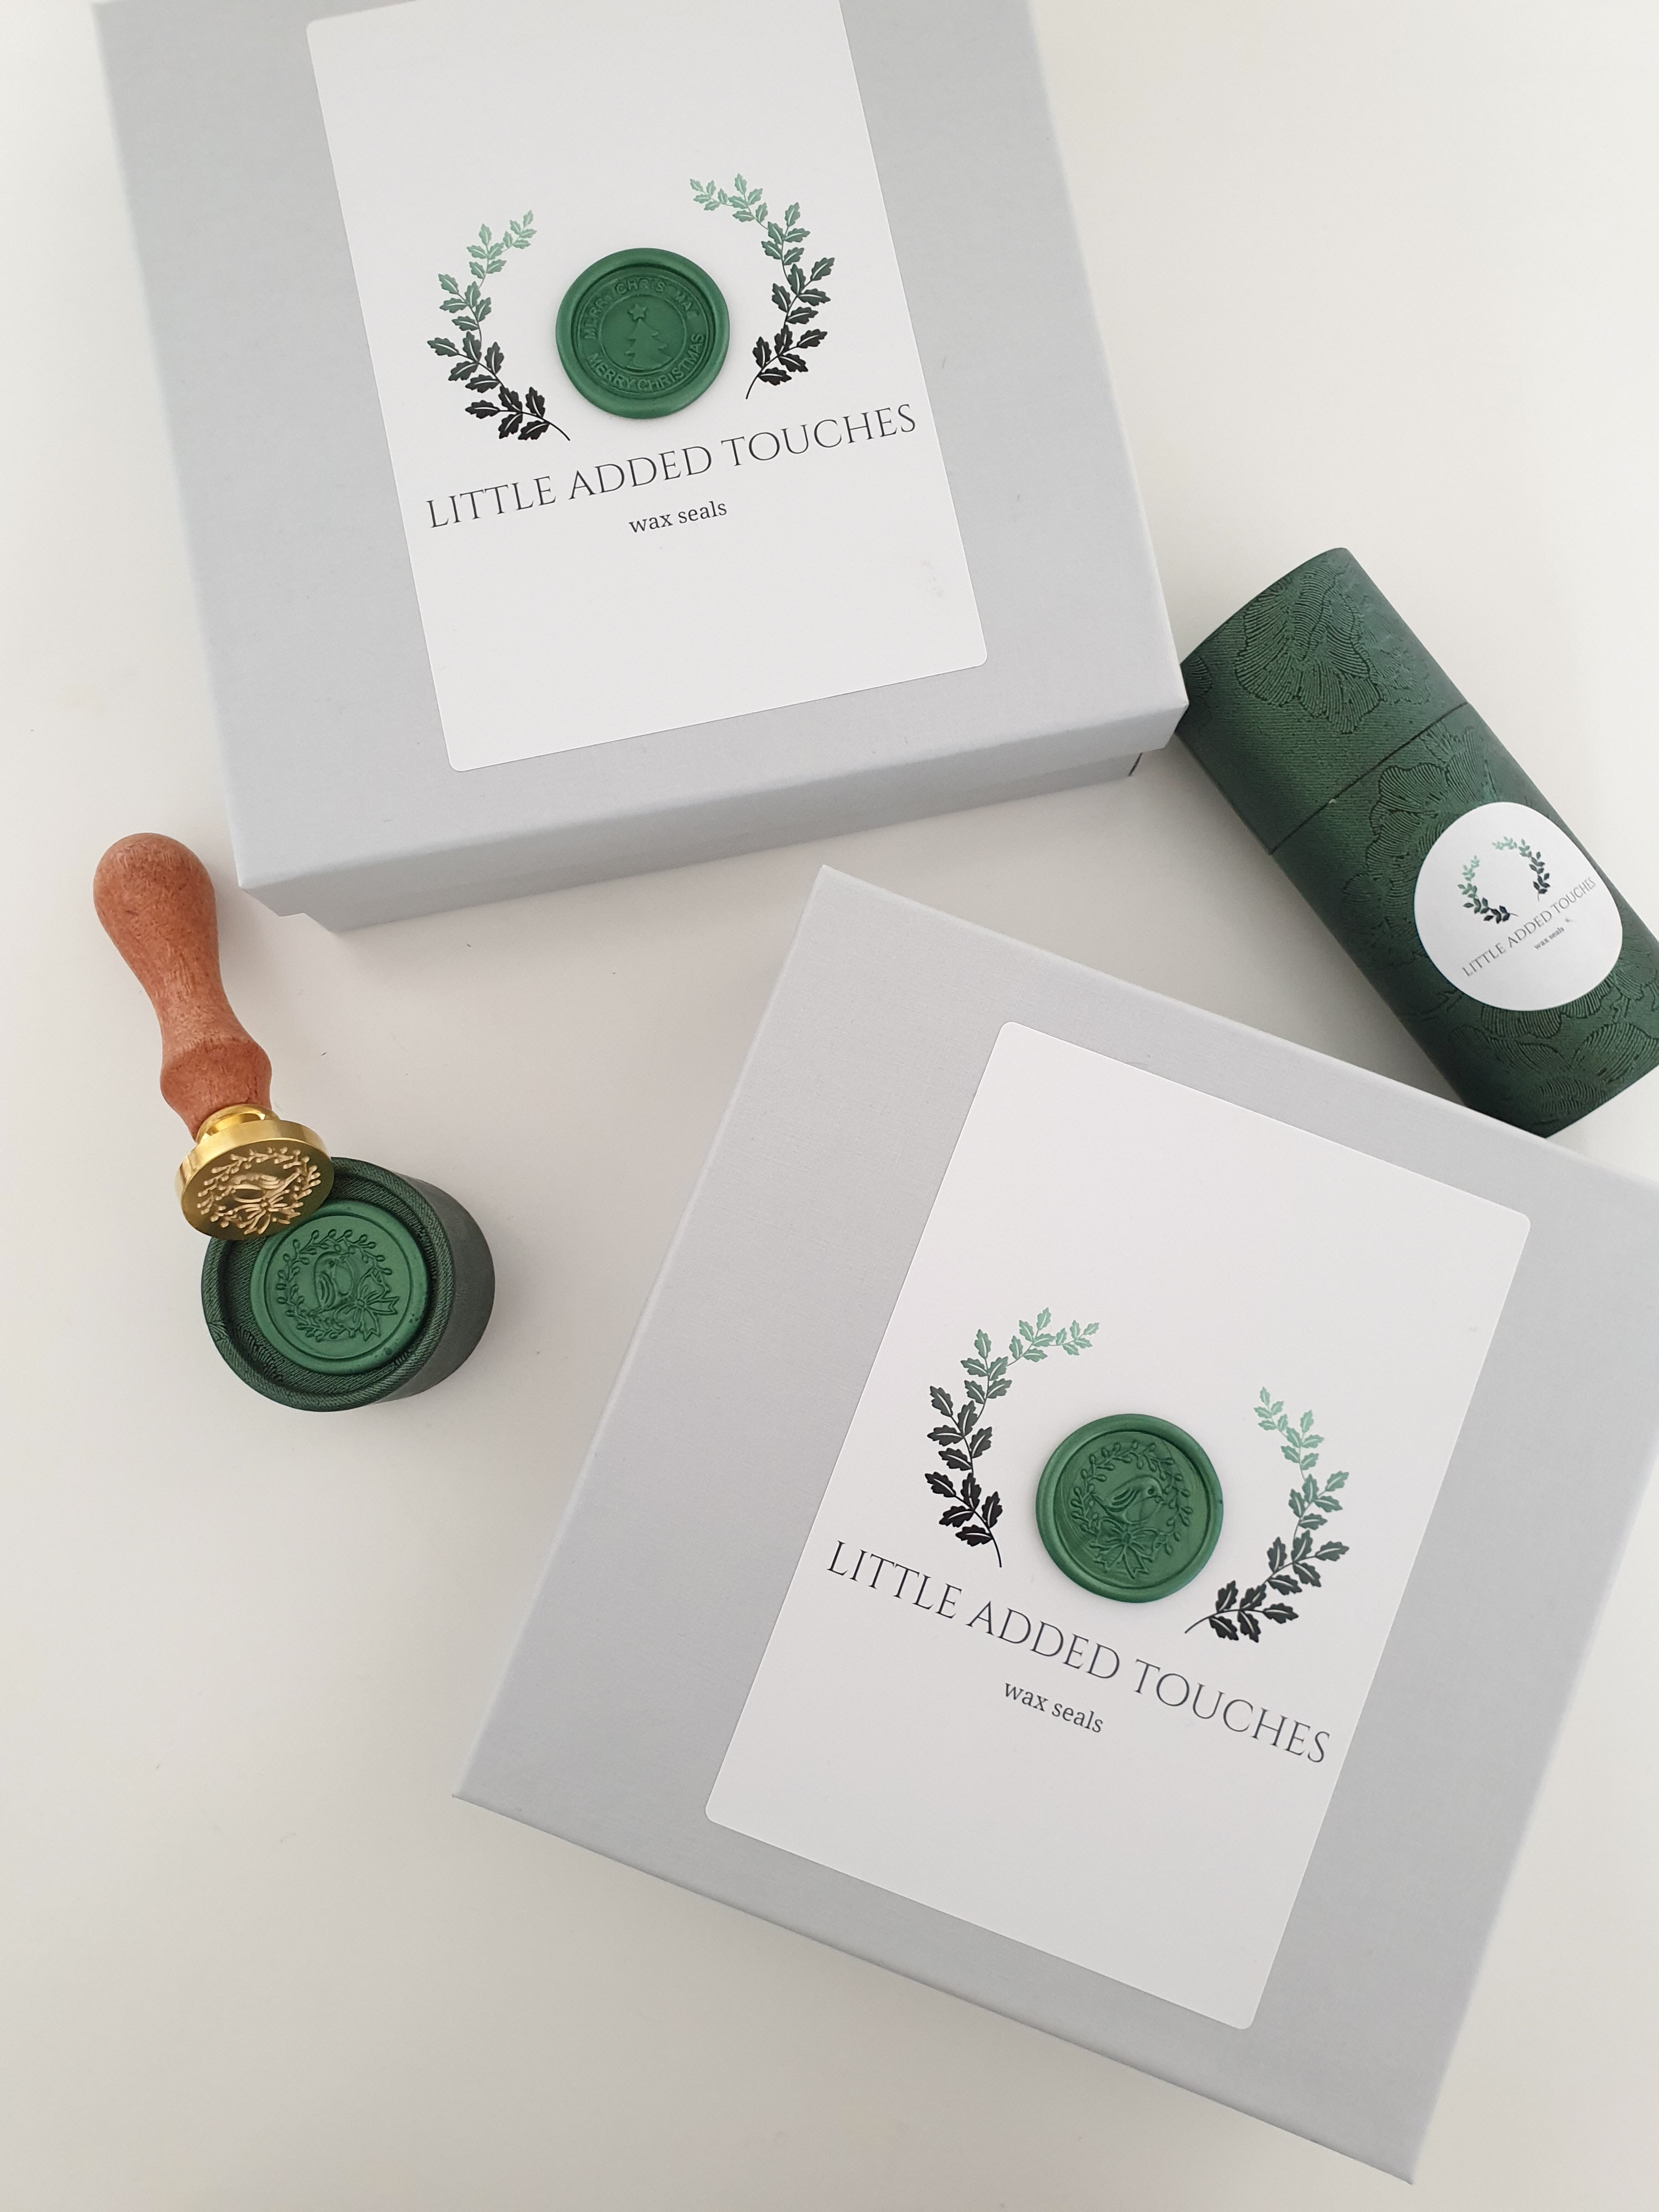 Thank You Envelope Seals - Self Adhesive Wax Seals Stickers -Antique Bronze  (100PCS) - for Wedding Invitation, Thanksgiving Card, Gift Wrapping and